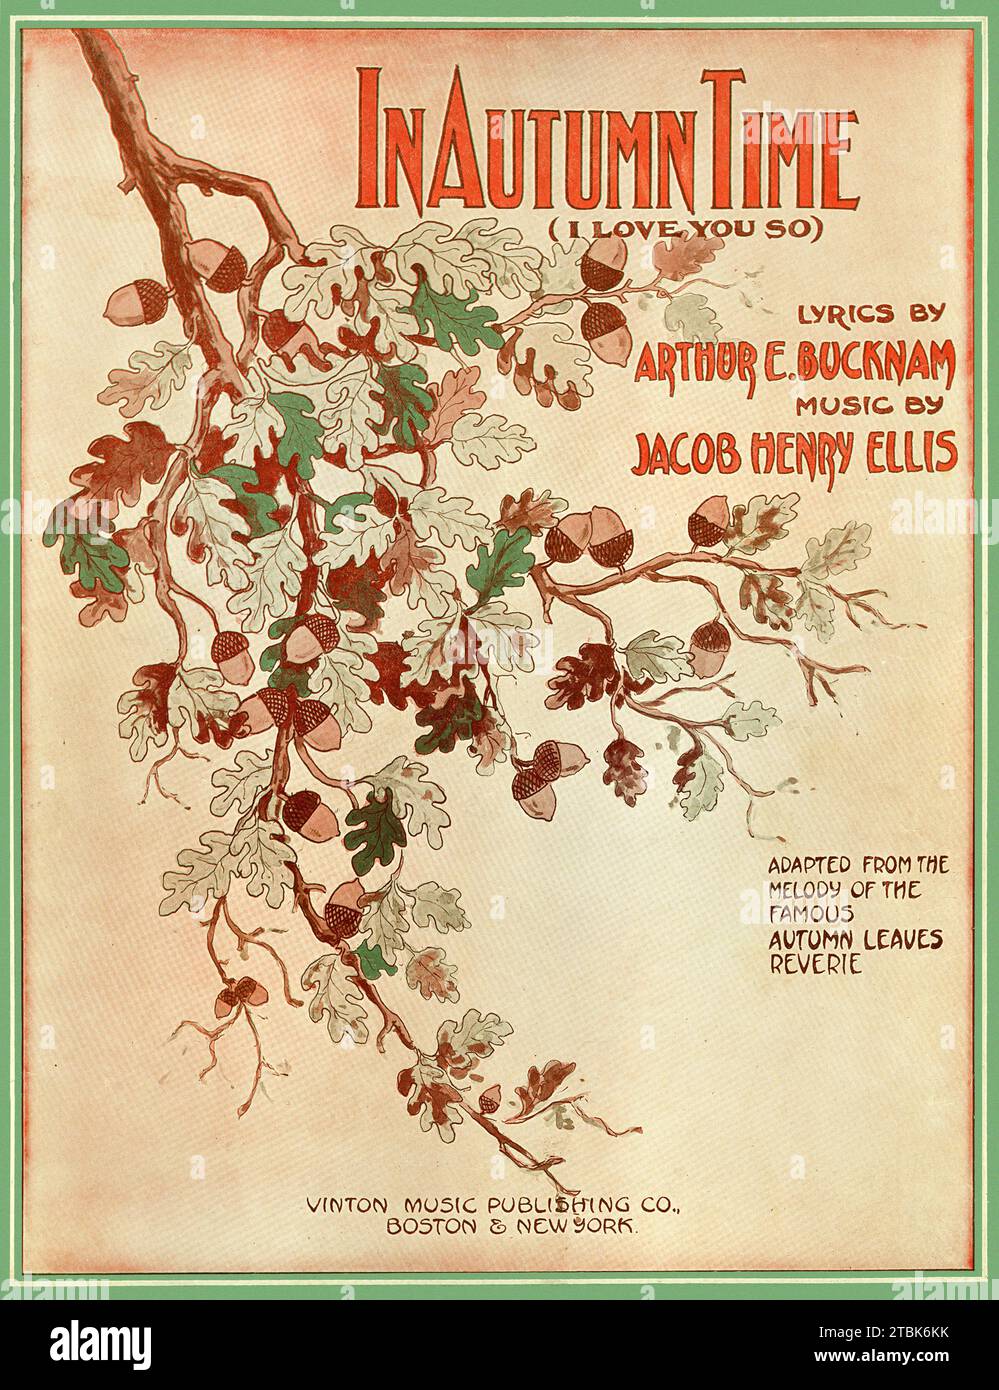 Cover art to sheet music of an Autumn theme. Stock Photo